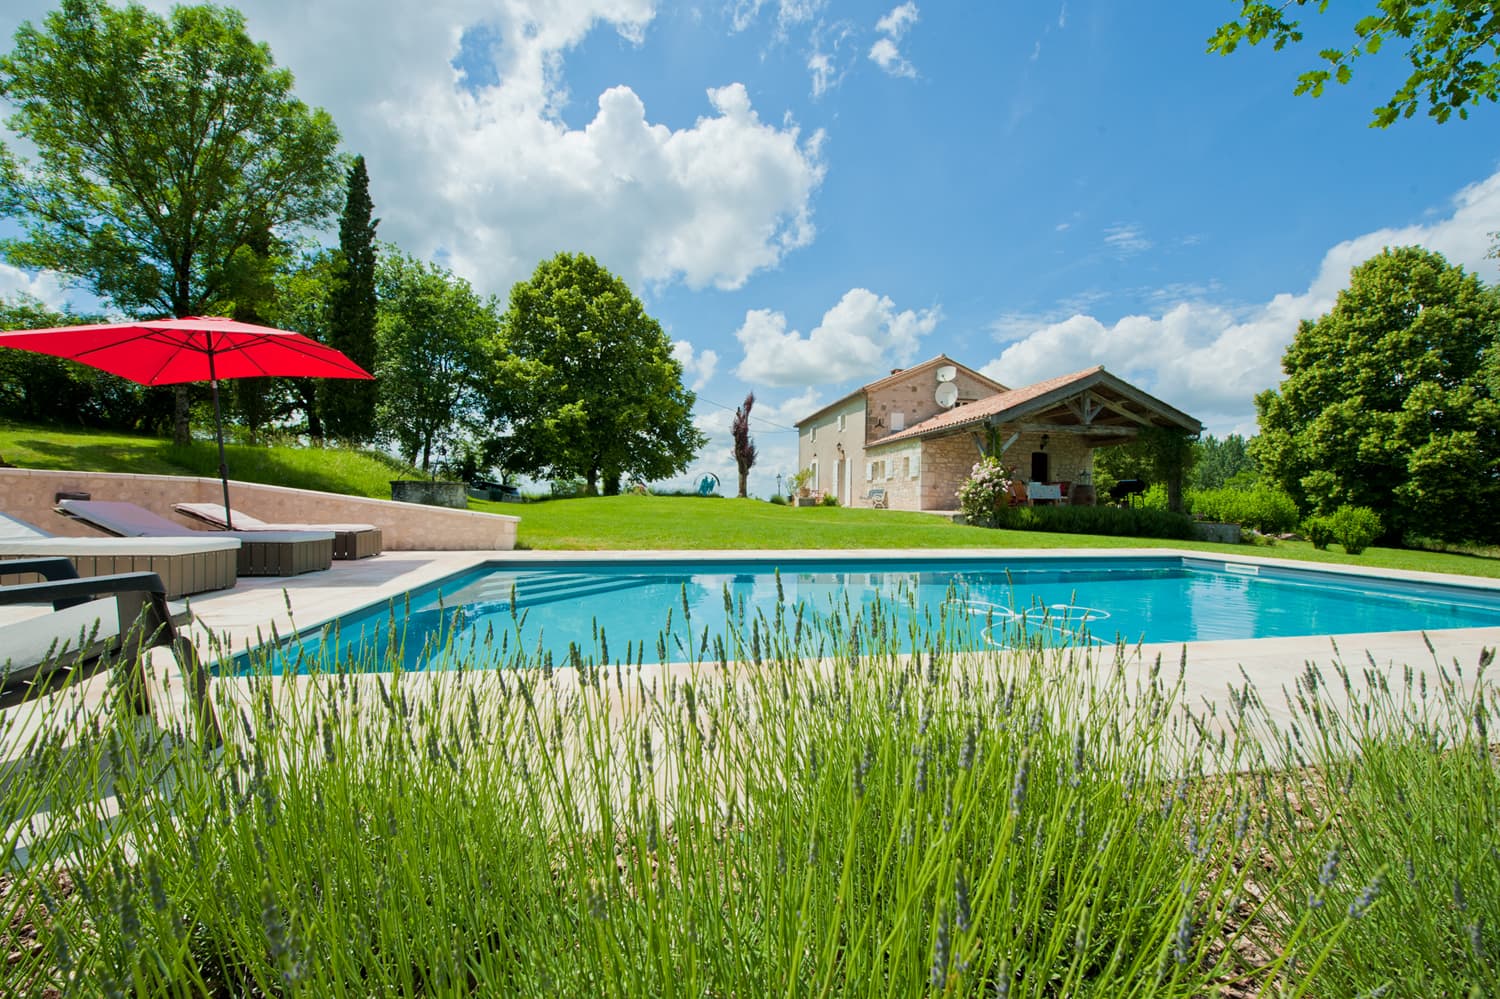 Holiday rental home in South-West France with private swimming pool | Maison Douzains